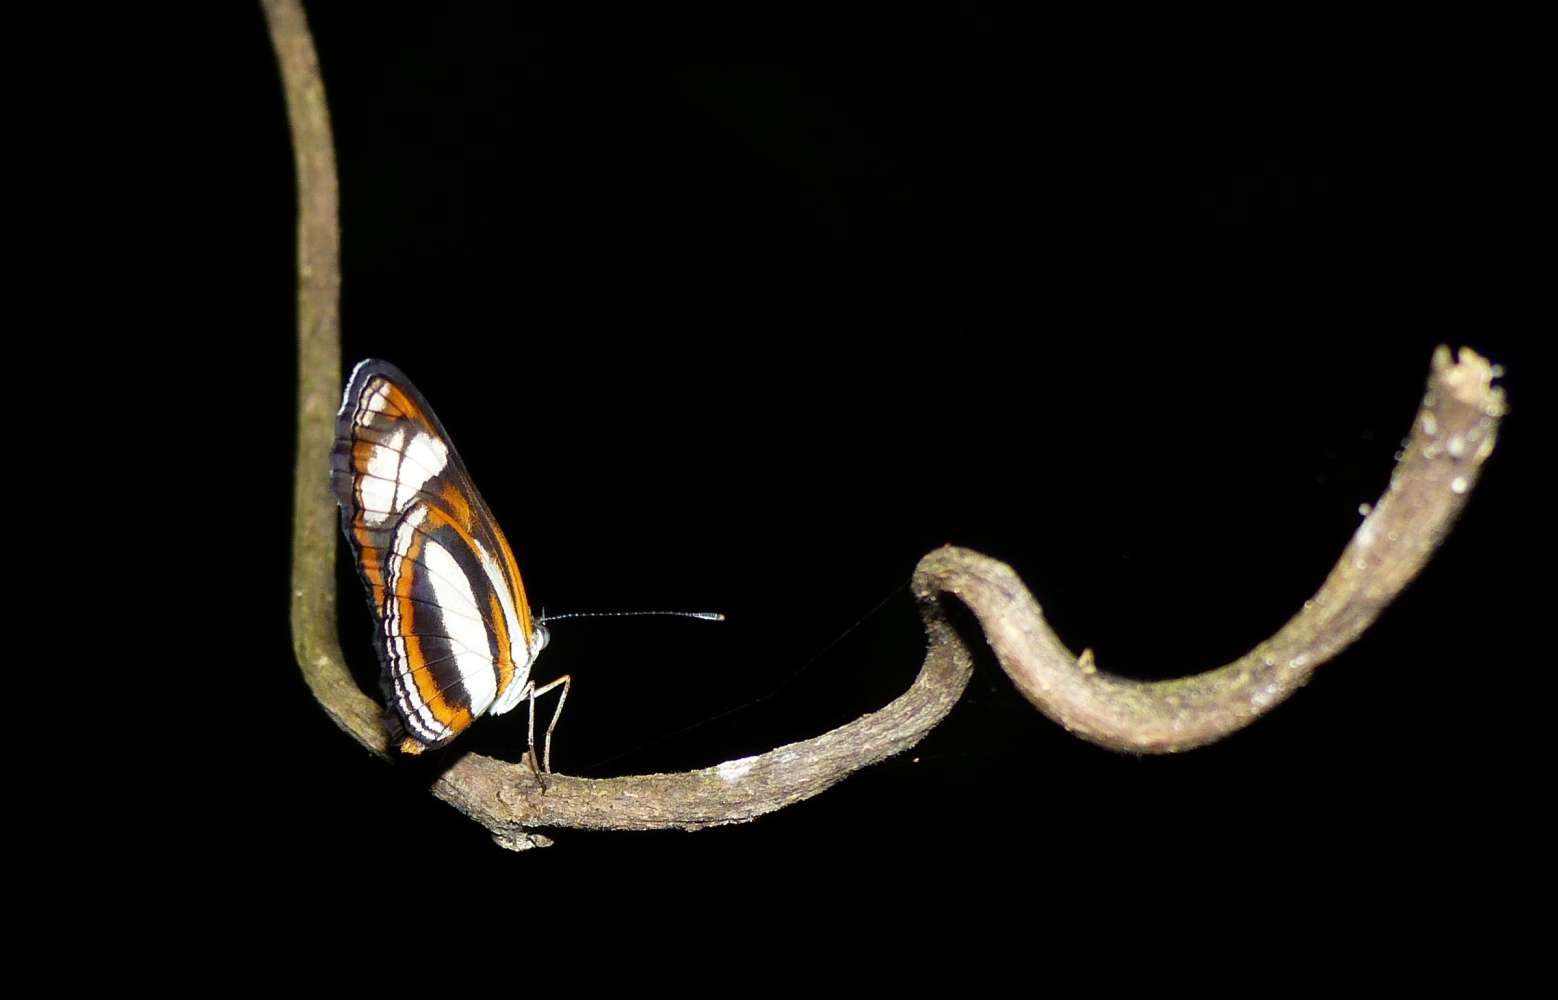 A butterfly sleeping on a branch